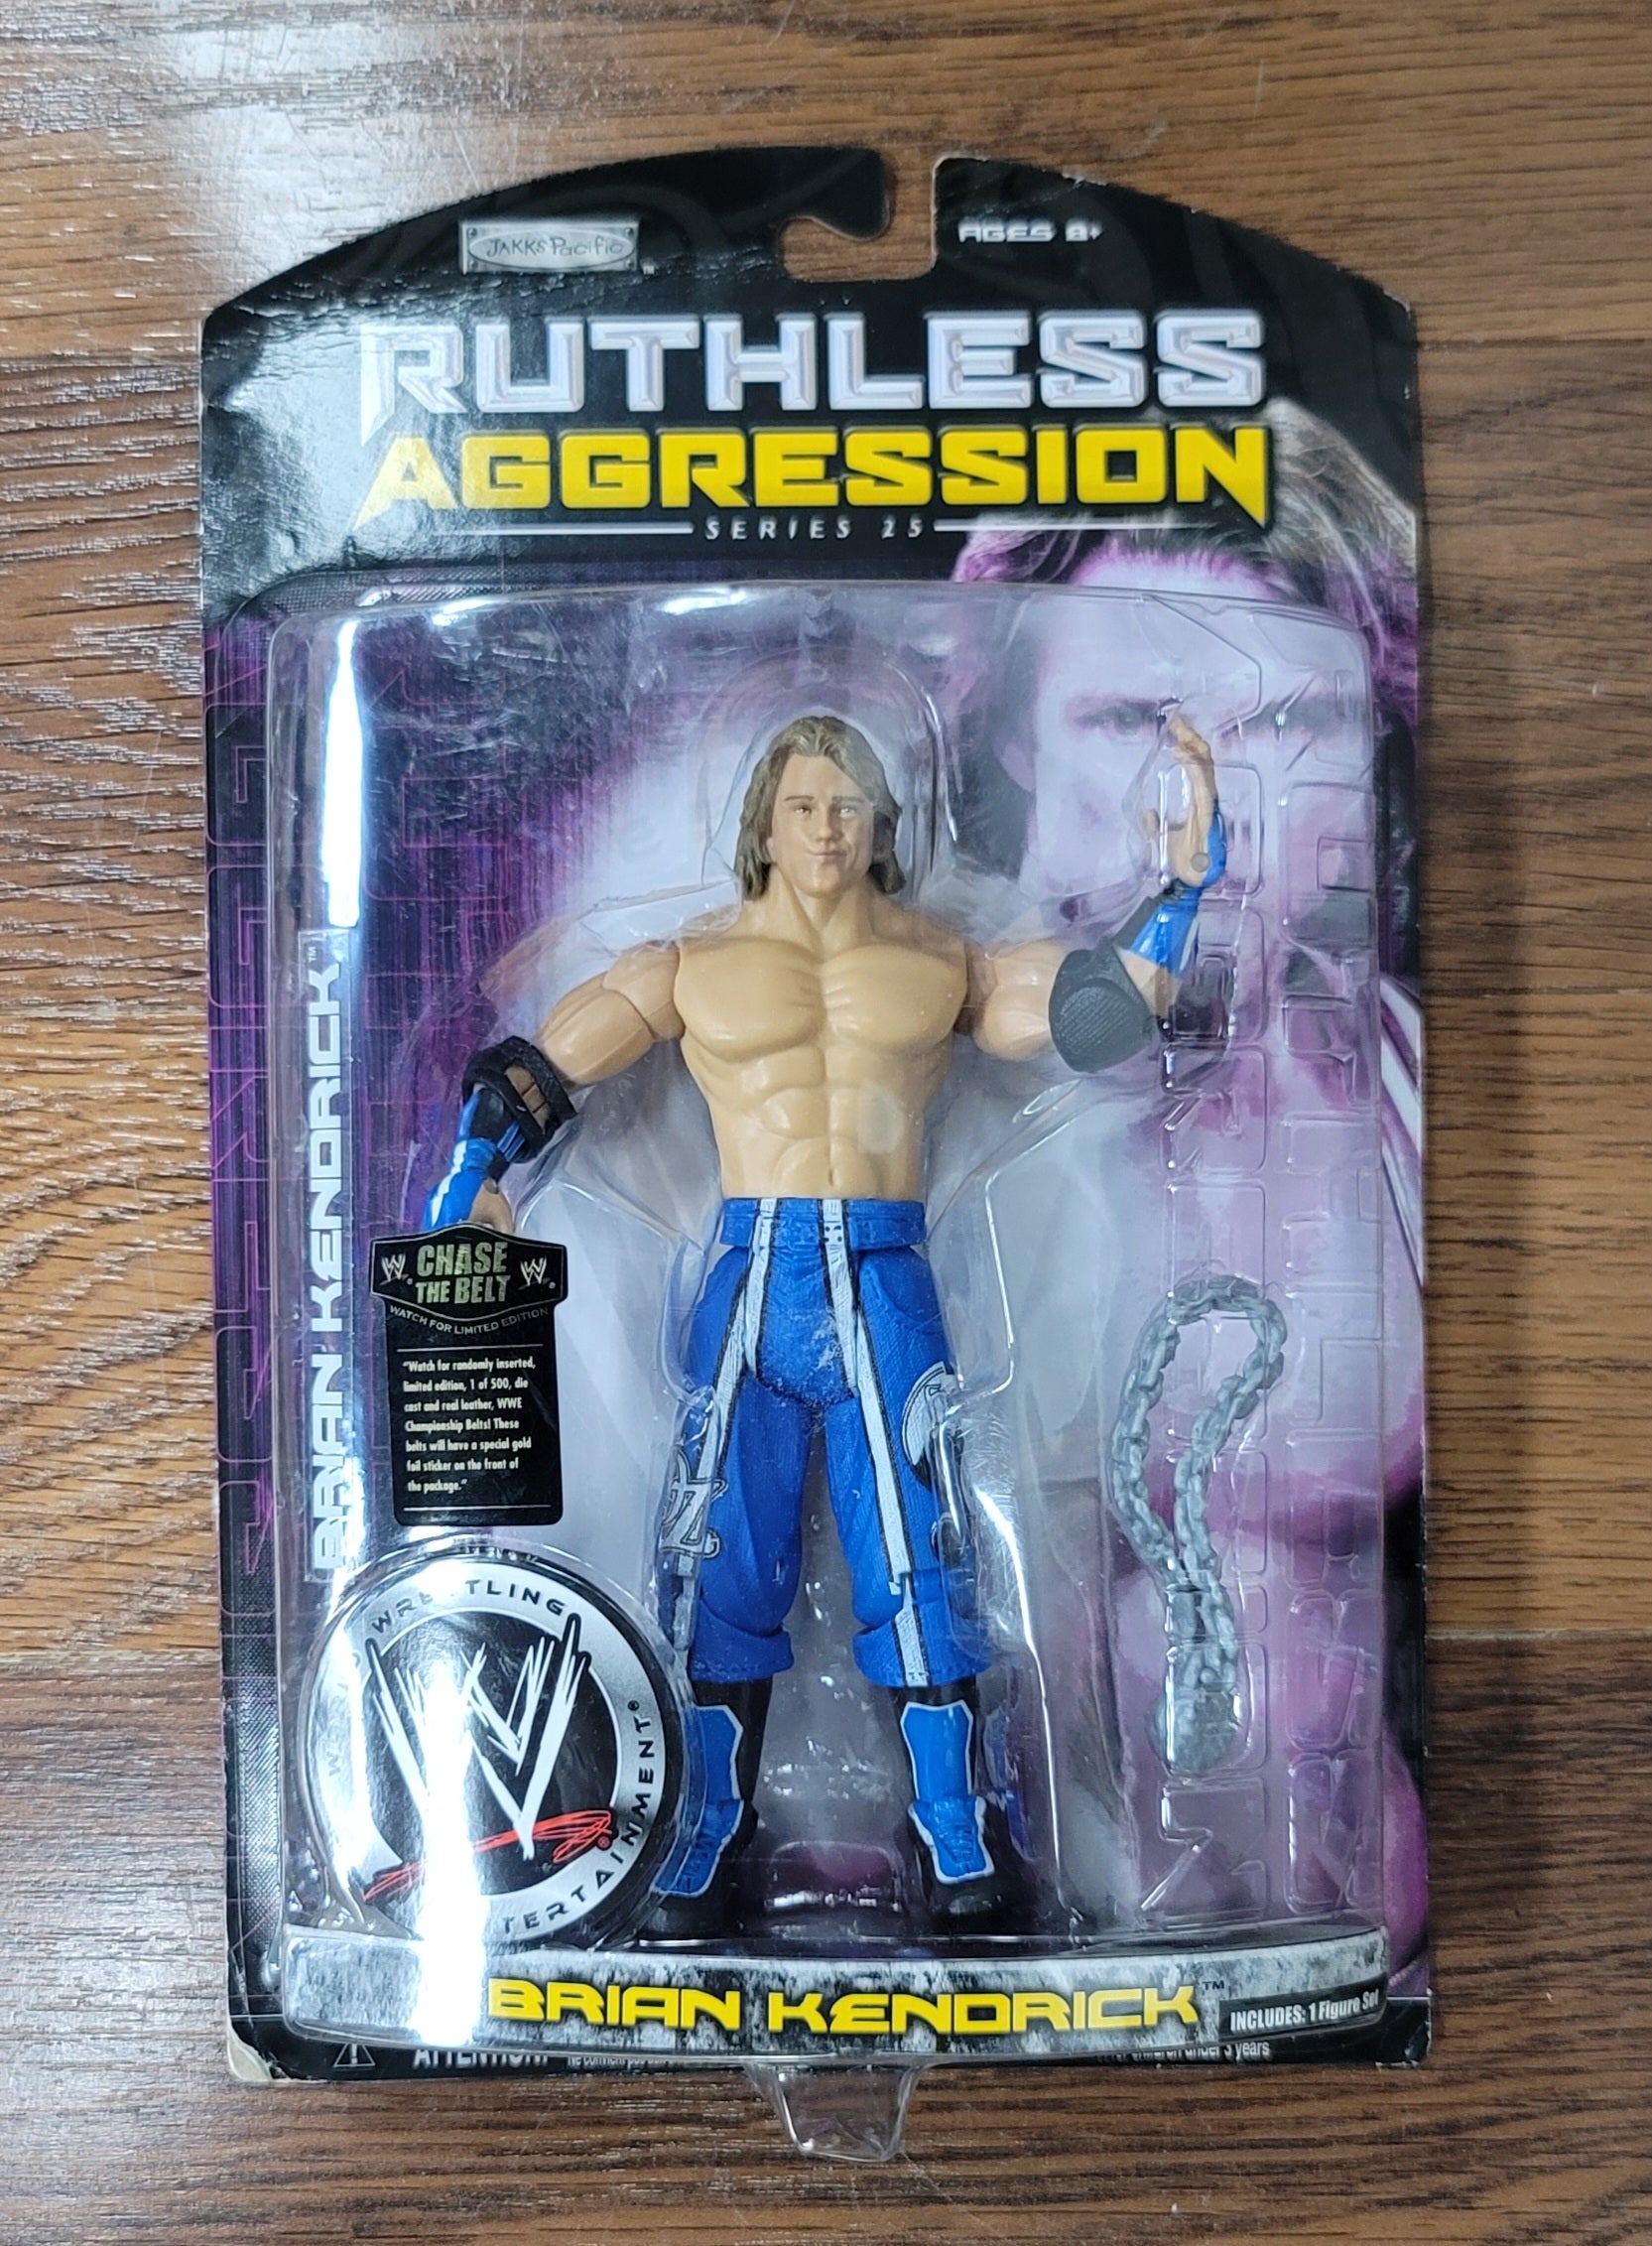 WWE Collectors Action Figures - Limited Edition